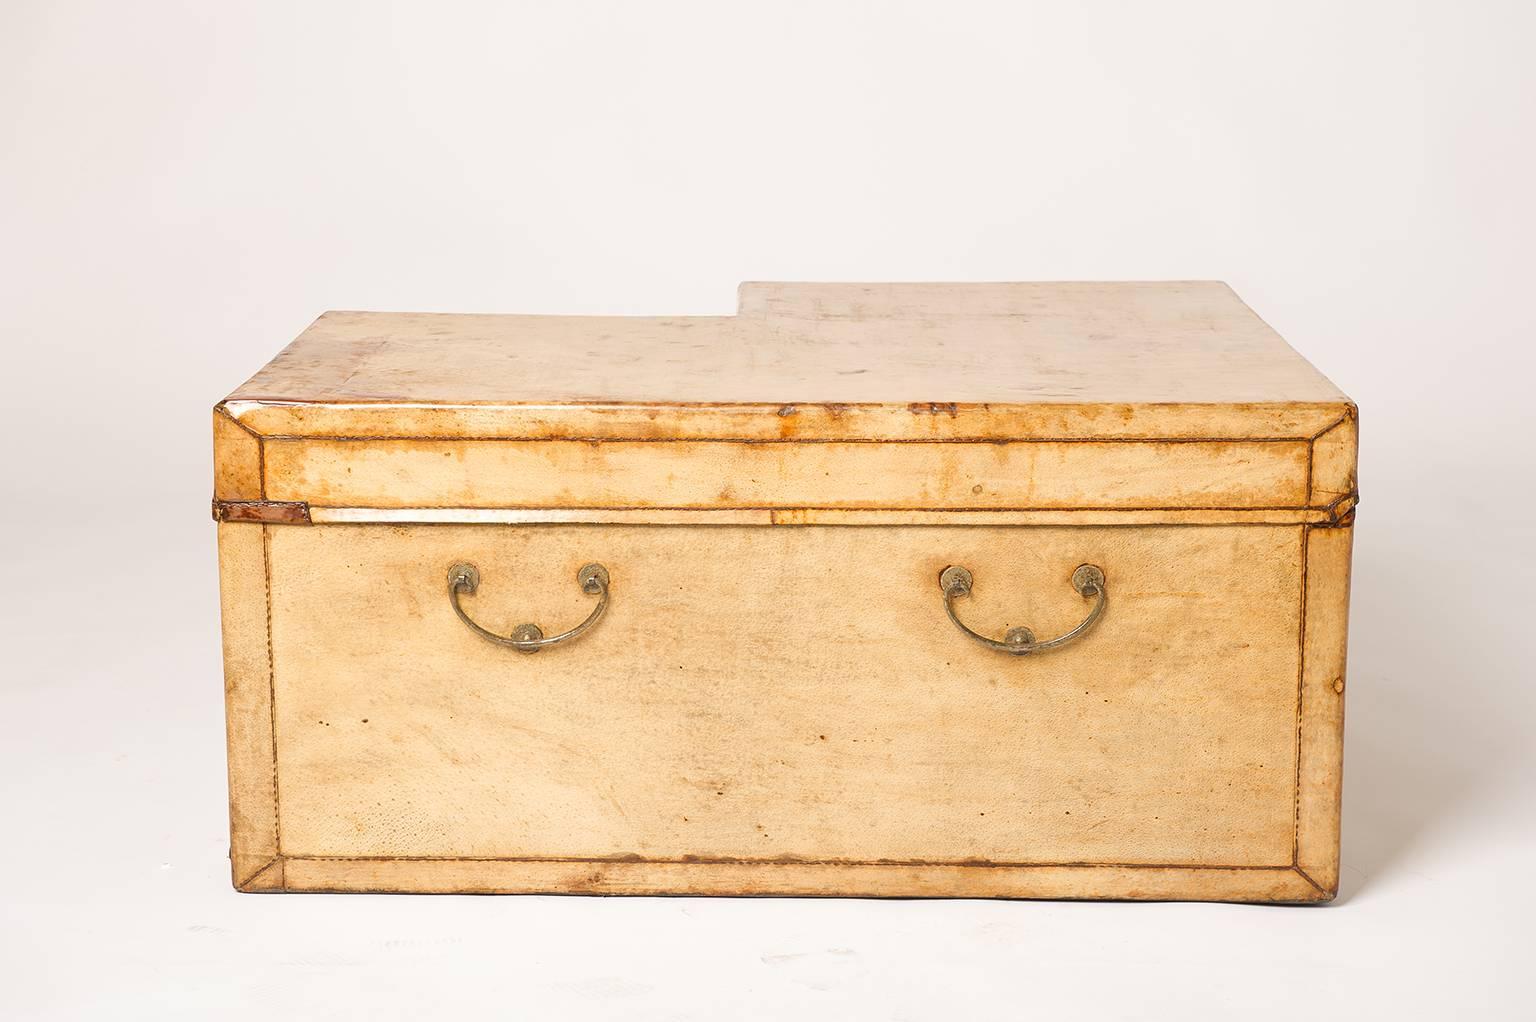 Unusual  leather trunk to be used as a side coffee table in the corner, or blanket chest - Very beautiful in a modern sitting room -
M/1764 -